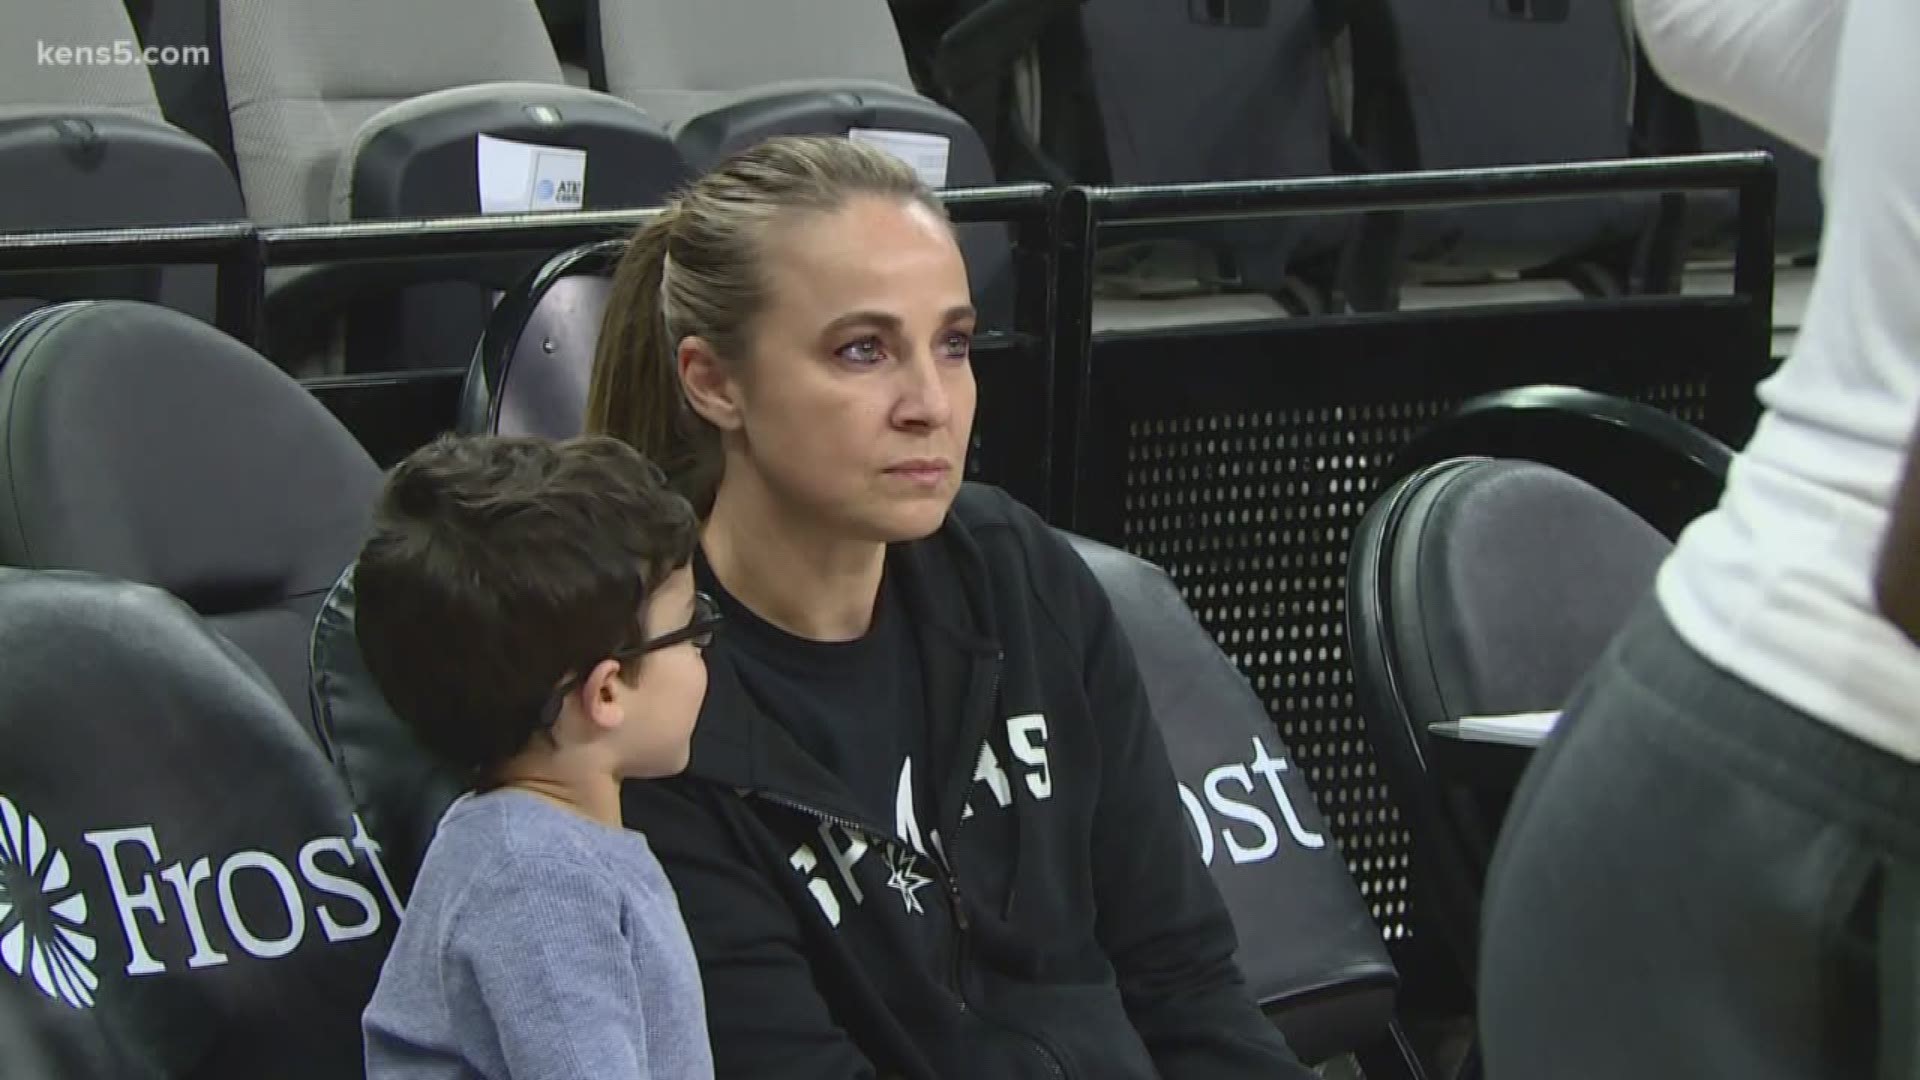 This is the third time the Spurs assistant coach and former WNBA player has come up short, despite impacting the game of basketball at every level.